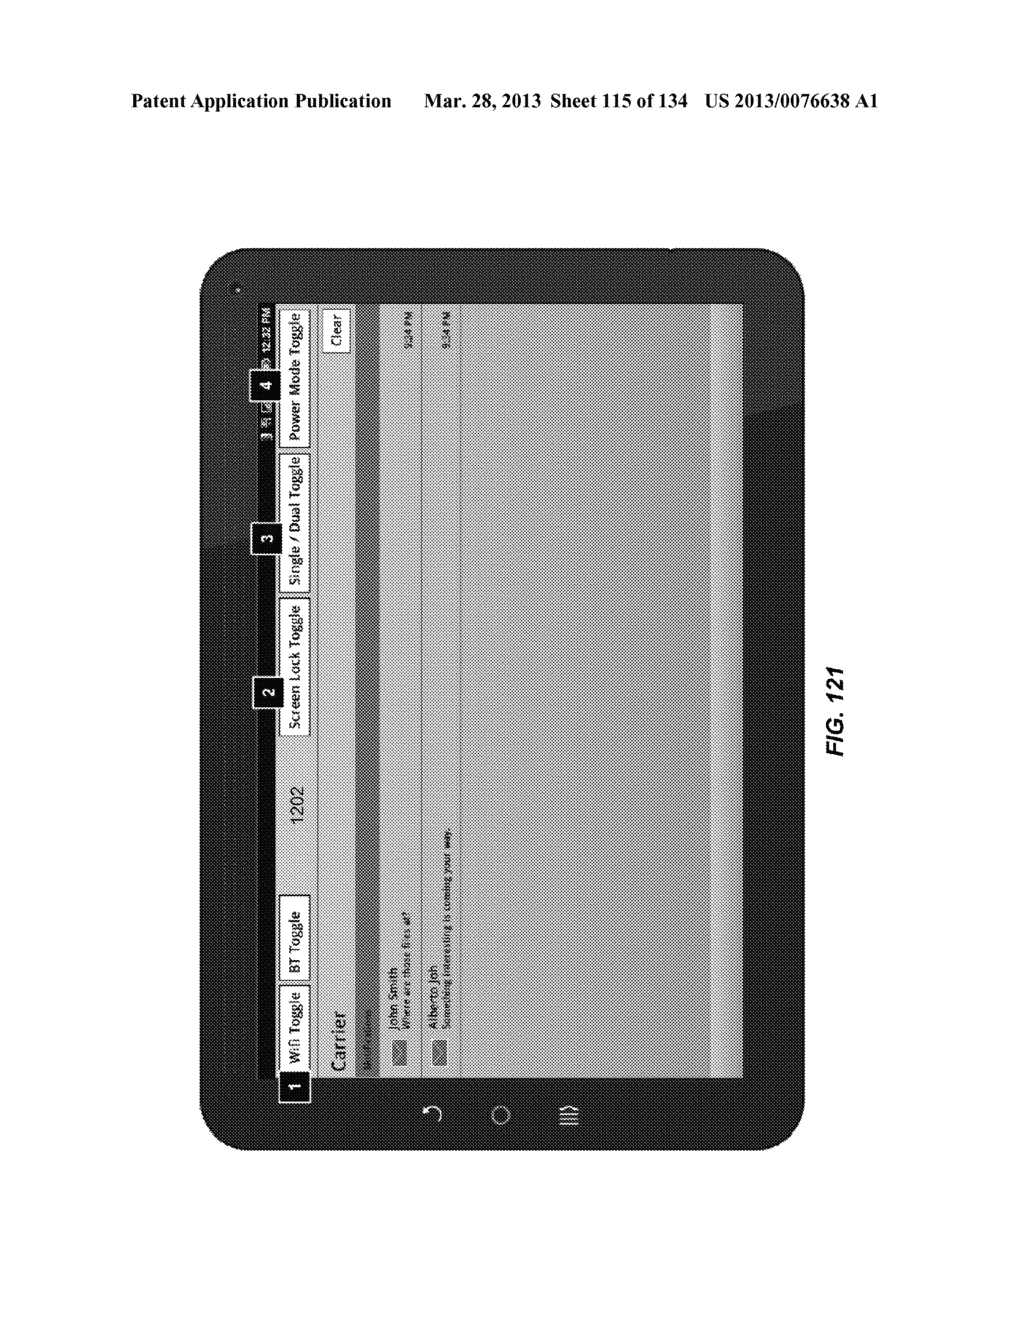 SMARTPAD DUAL SCREEN KEYBOARD WITH CONTEXTUAL LAYOUT - diagram, schematic, and image 116